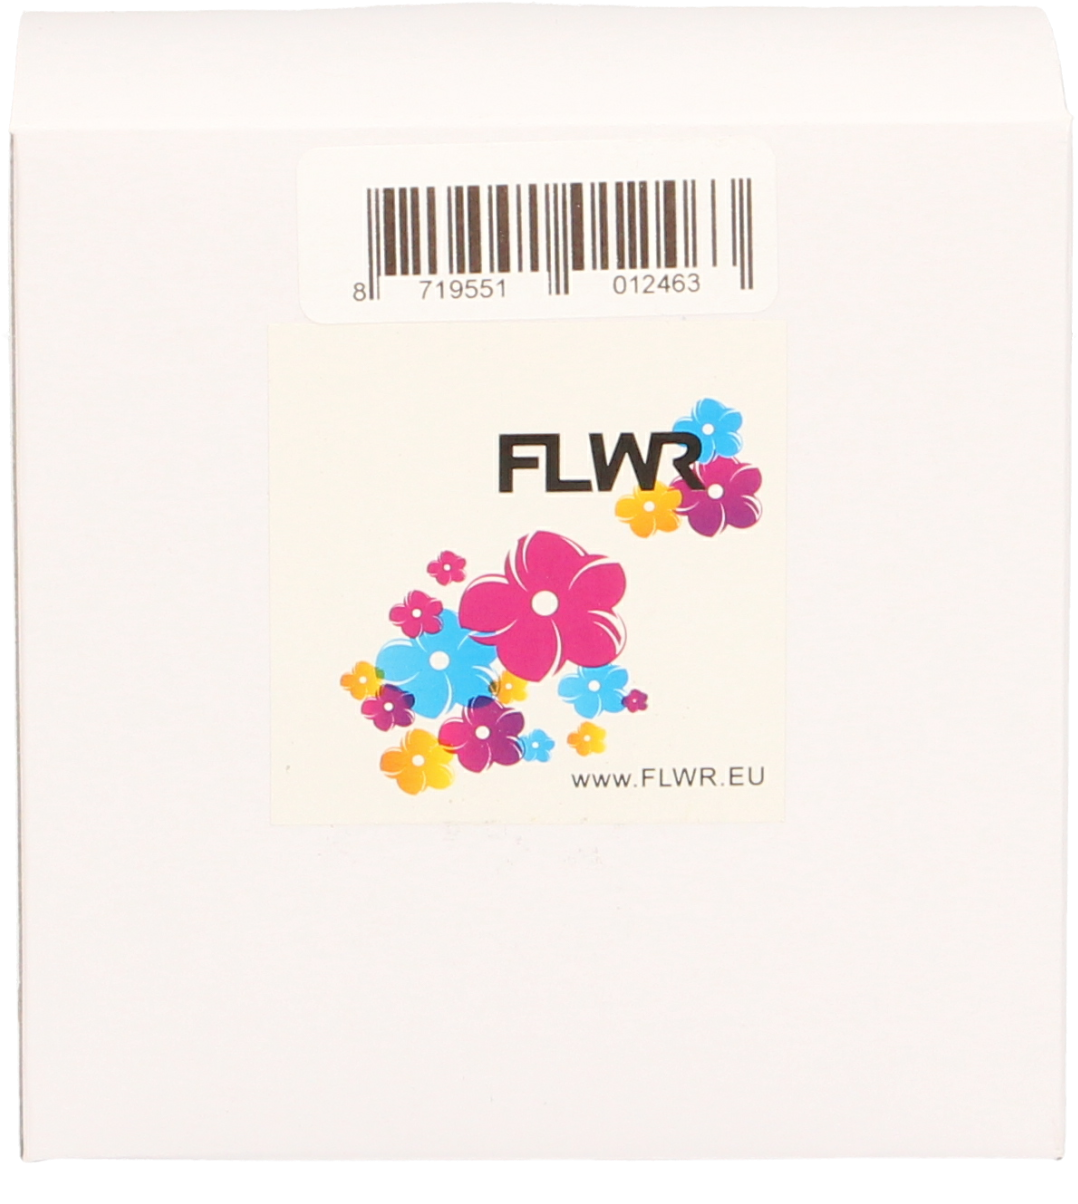 FLWR Brother  DK-11221 23 mm x 23 mm  wit